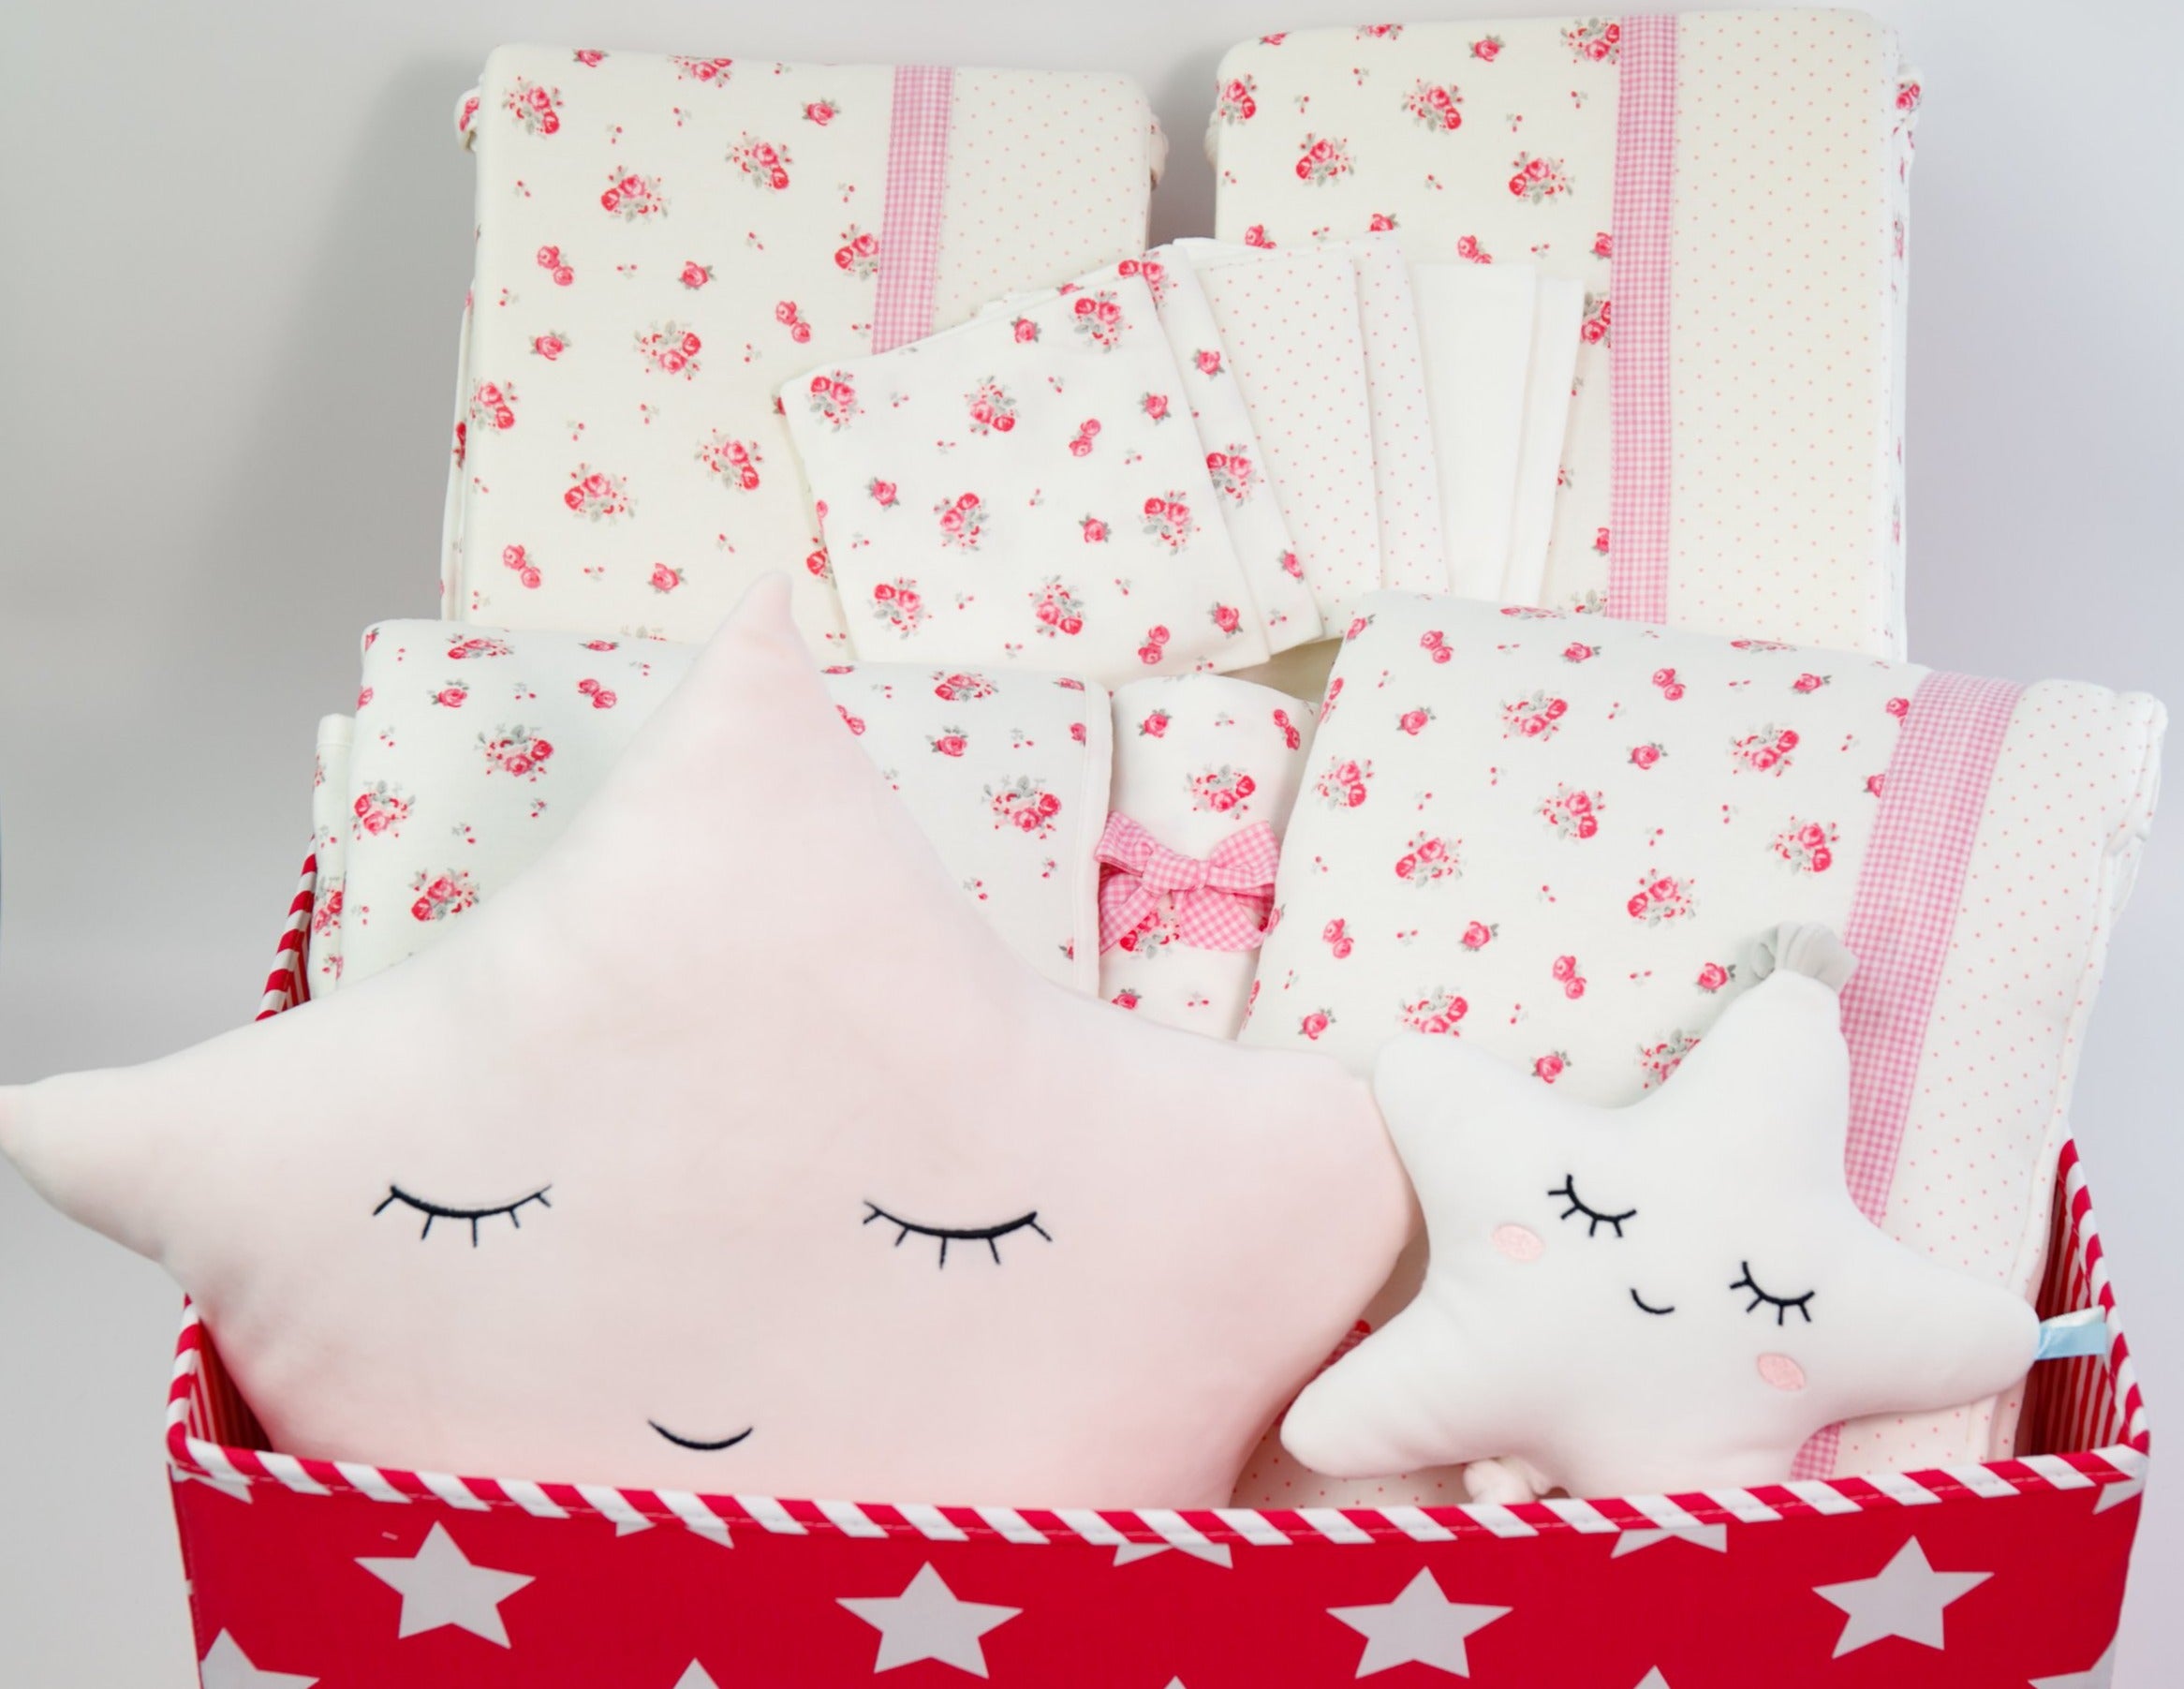 Special Cream & Pink Floral Bedding Gift Box